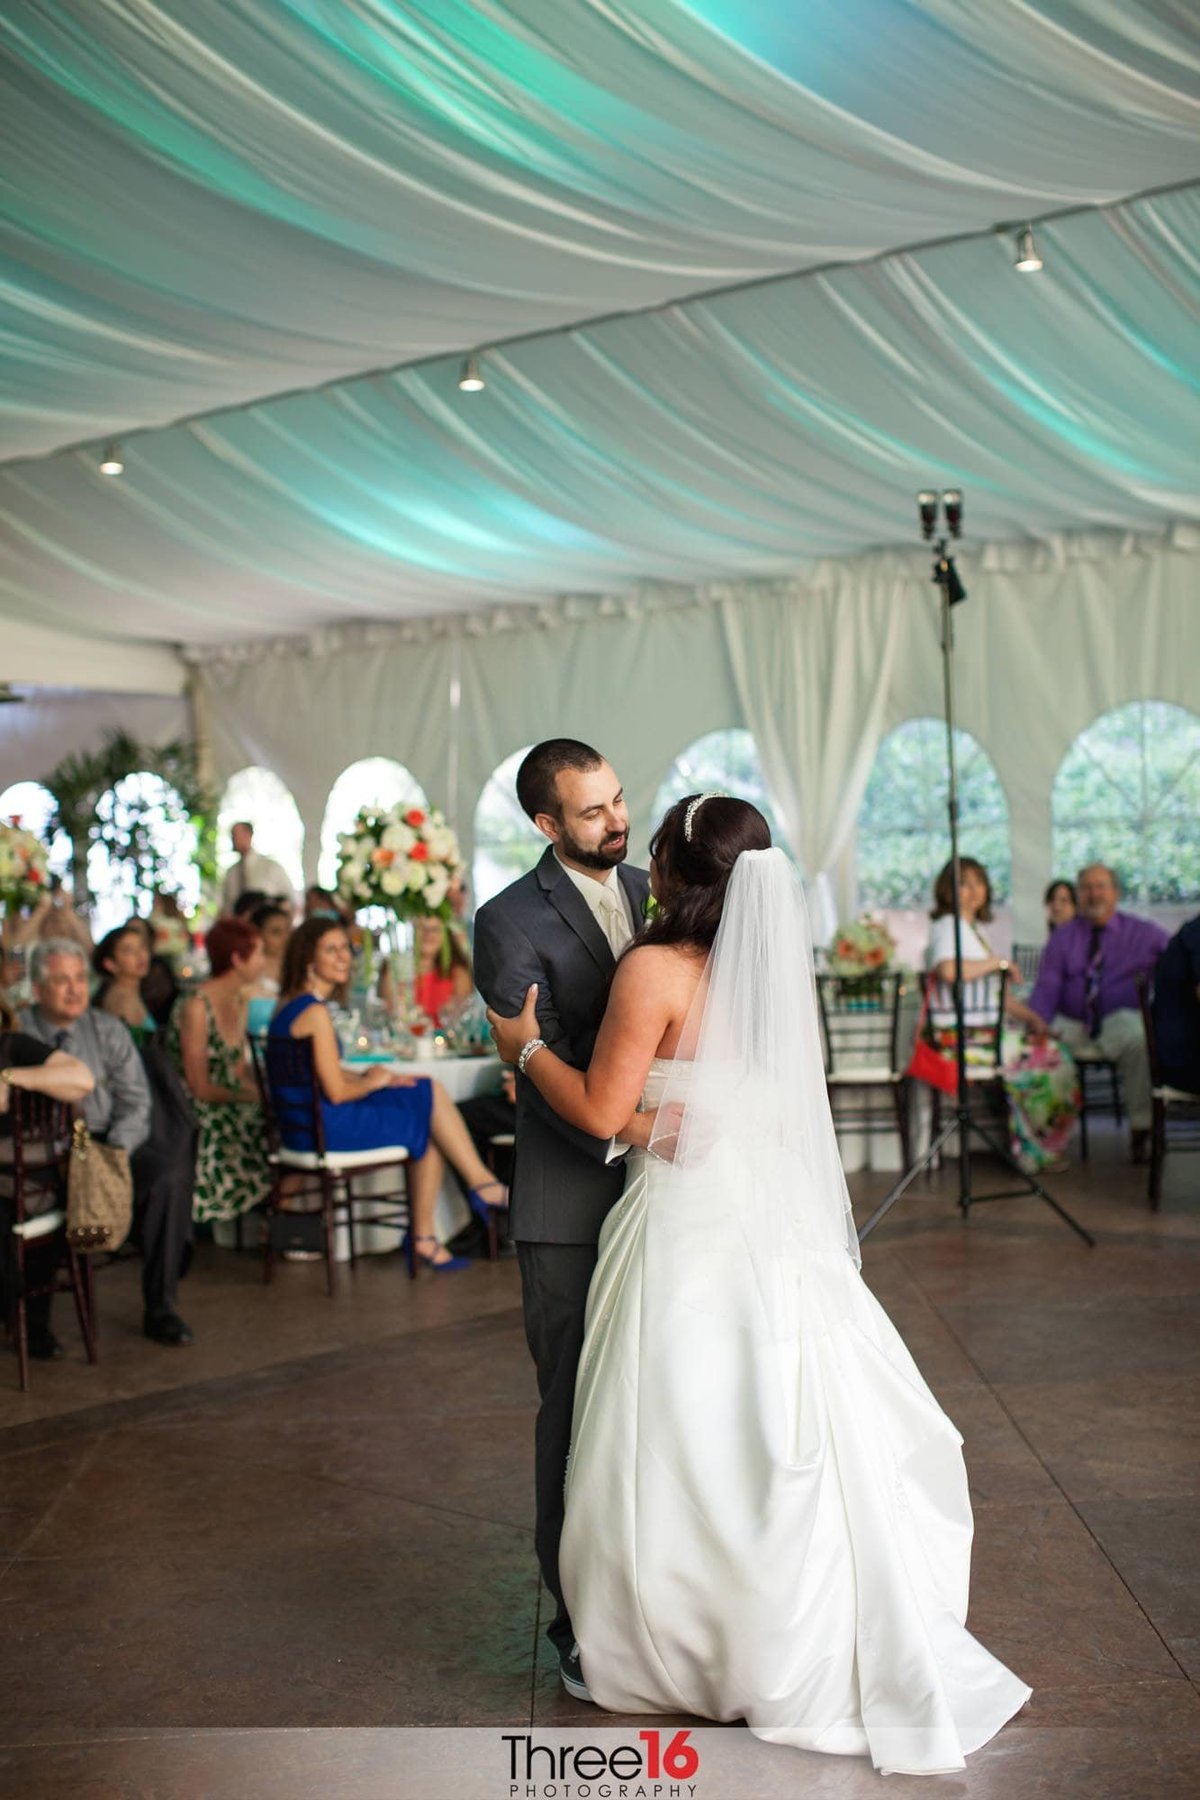 Bride and Groom's first dance